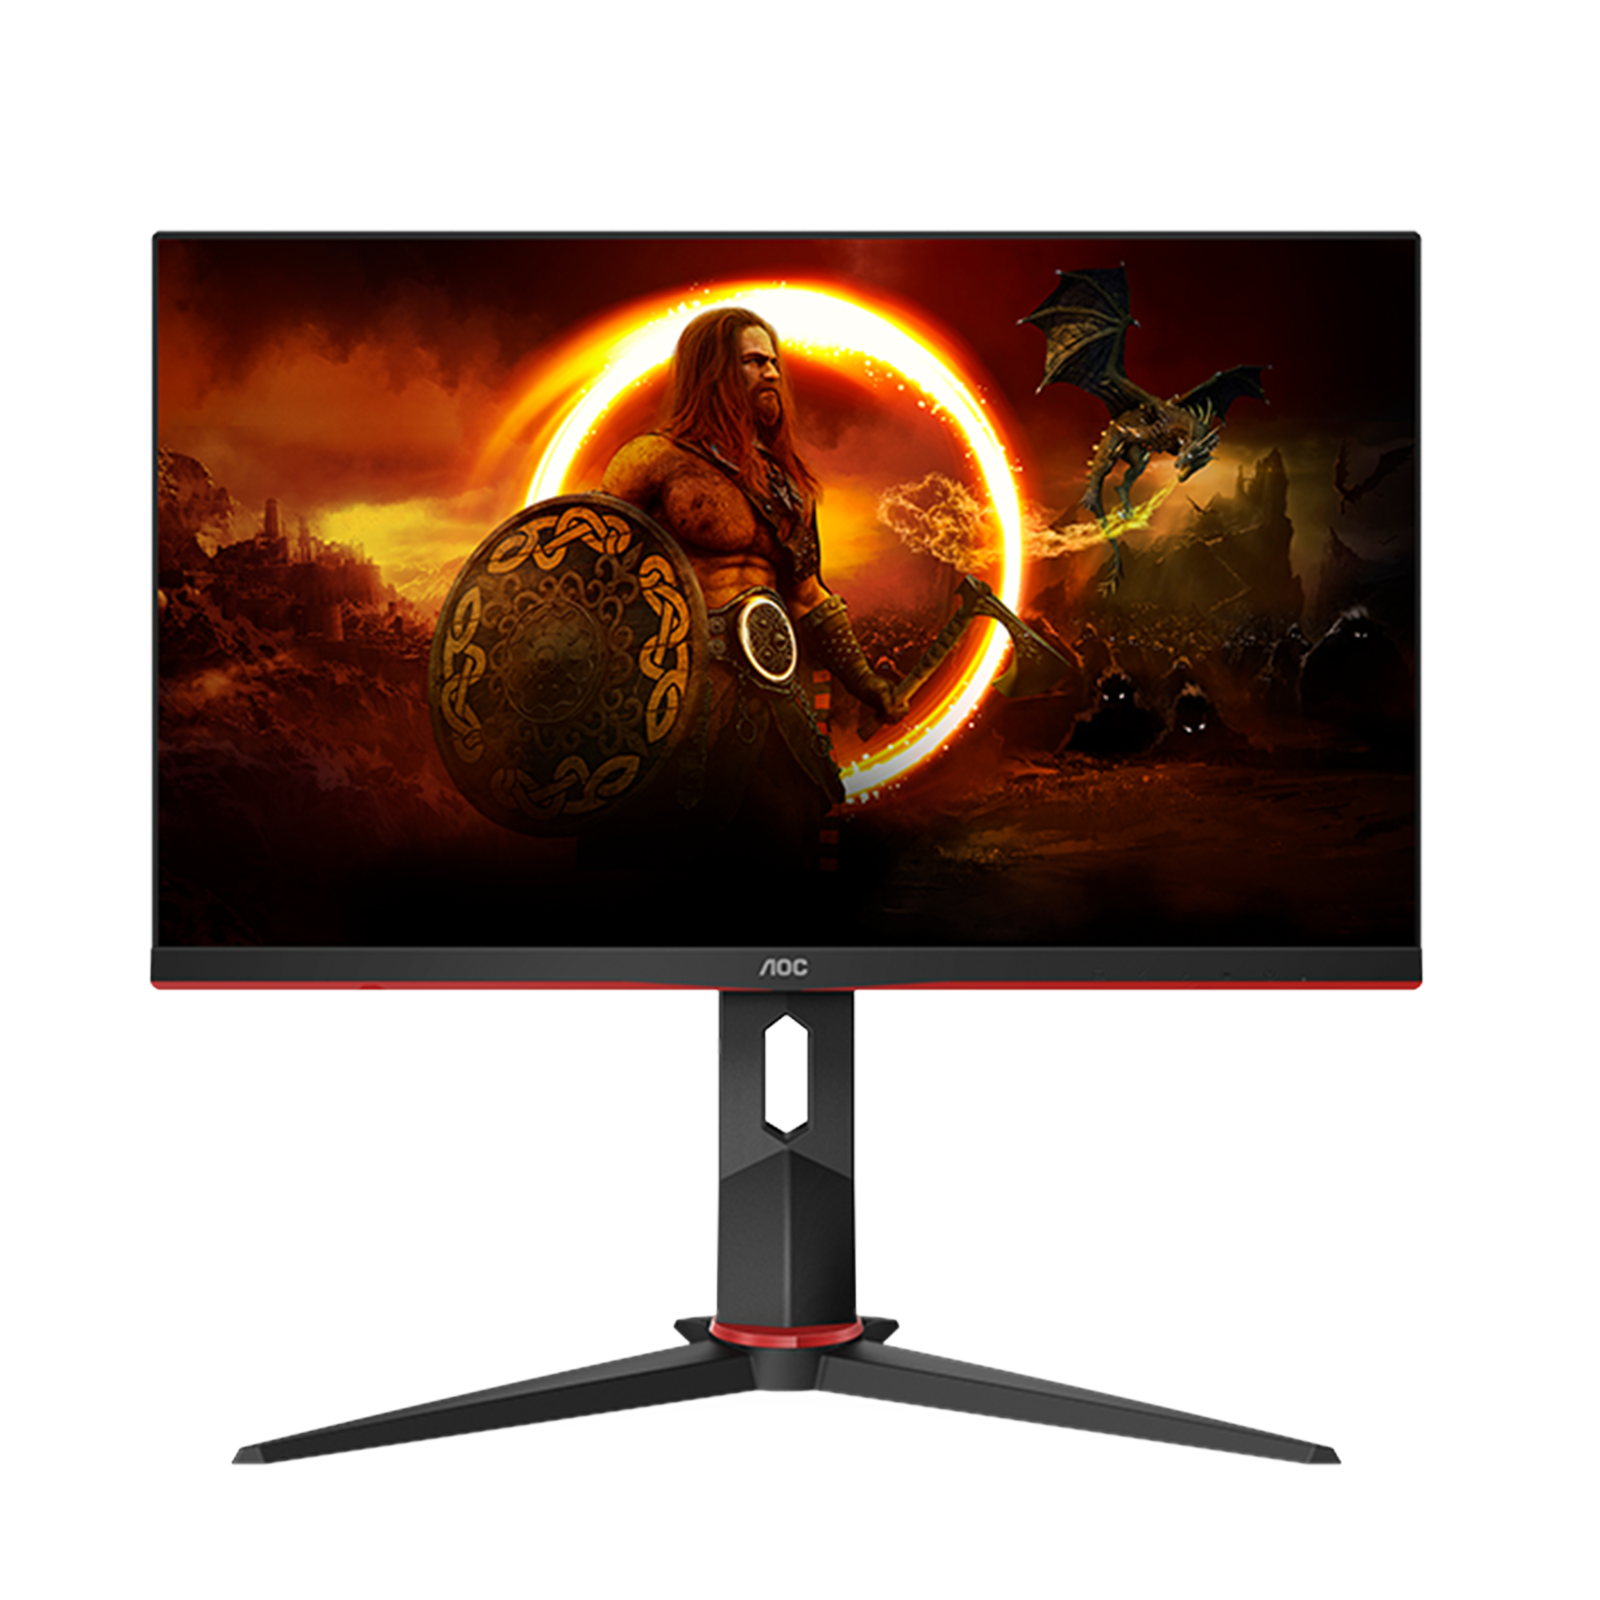 Buy Gaming Monitors With 144hz Refresh Rate Online at Best Prices